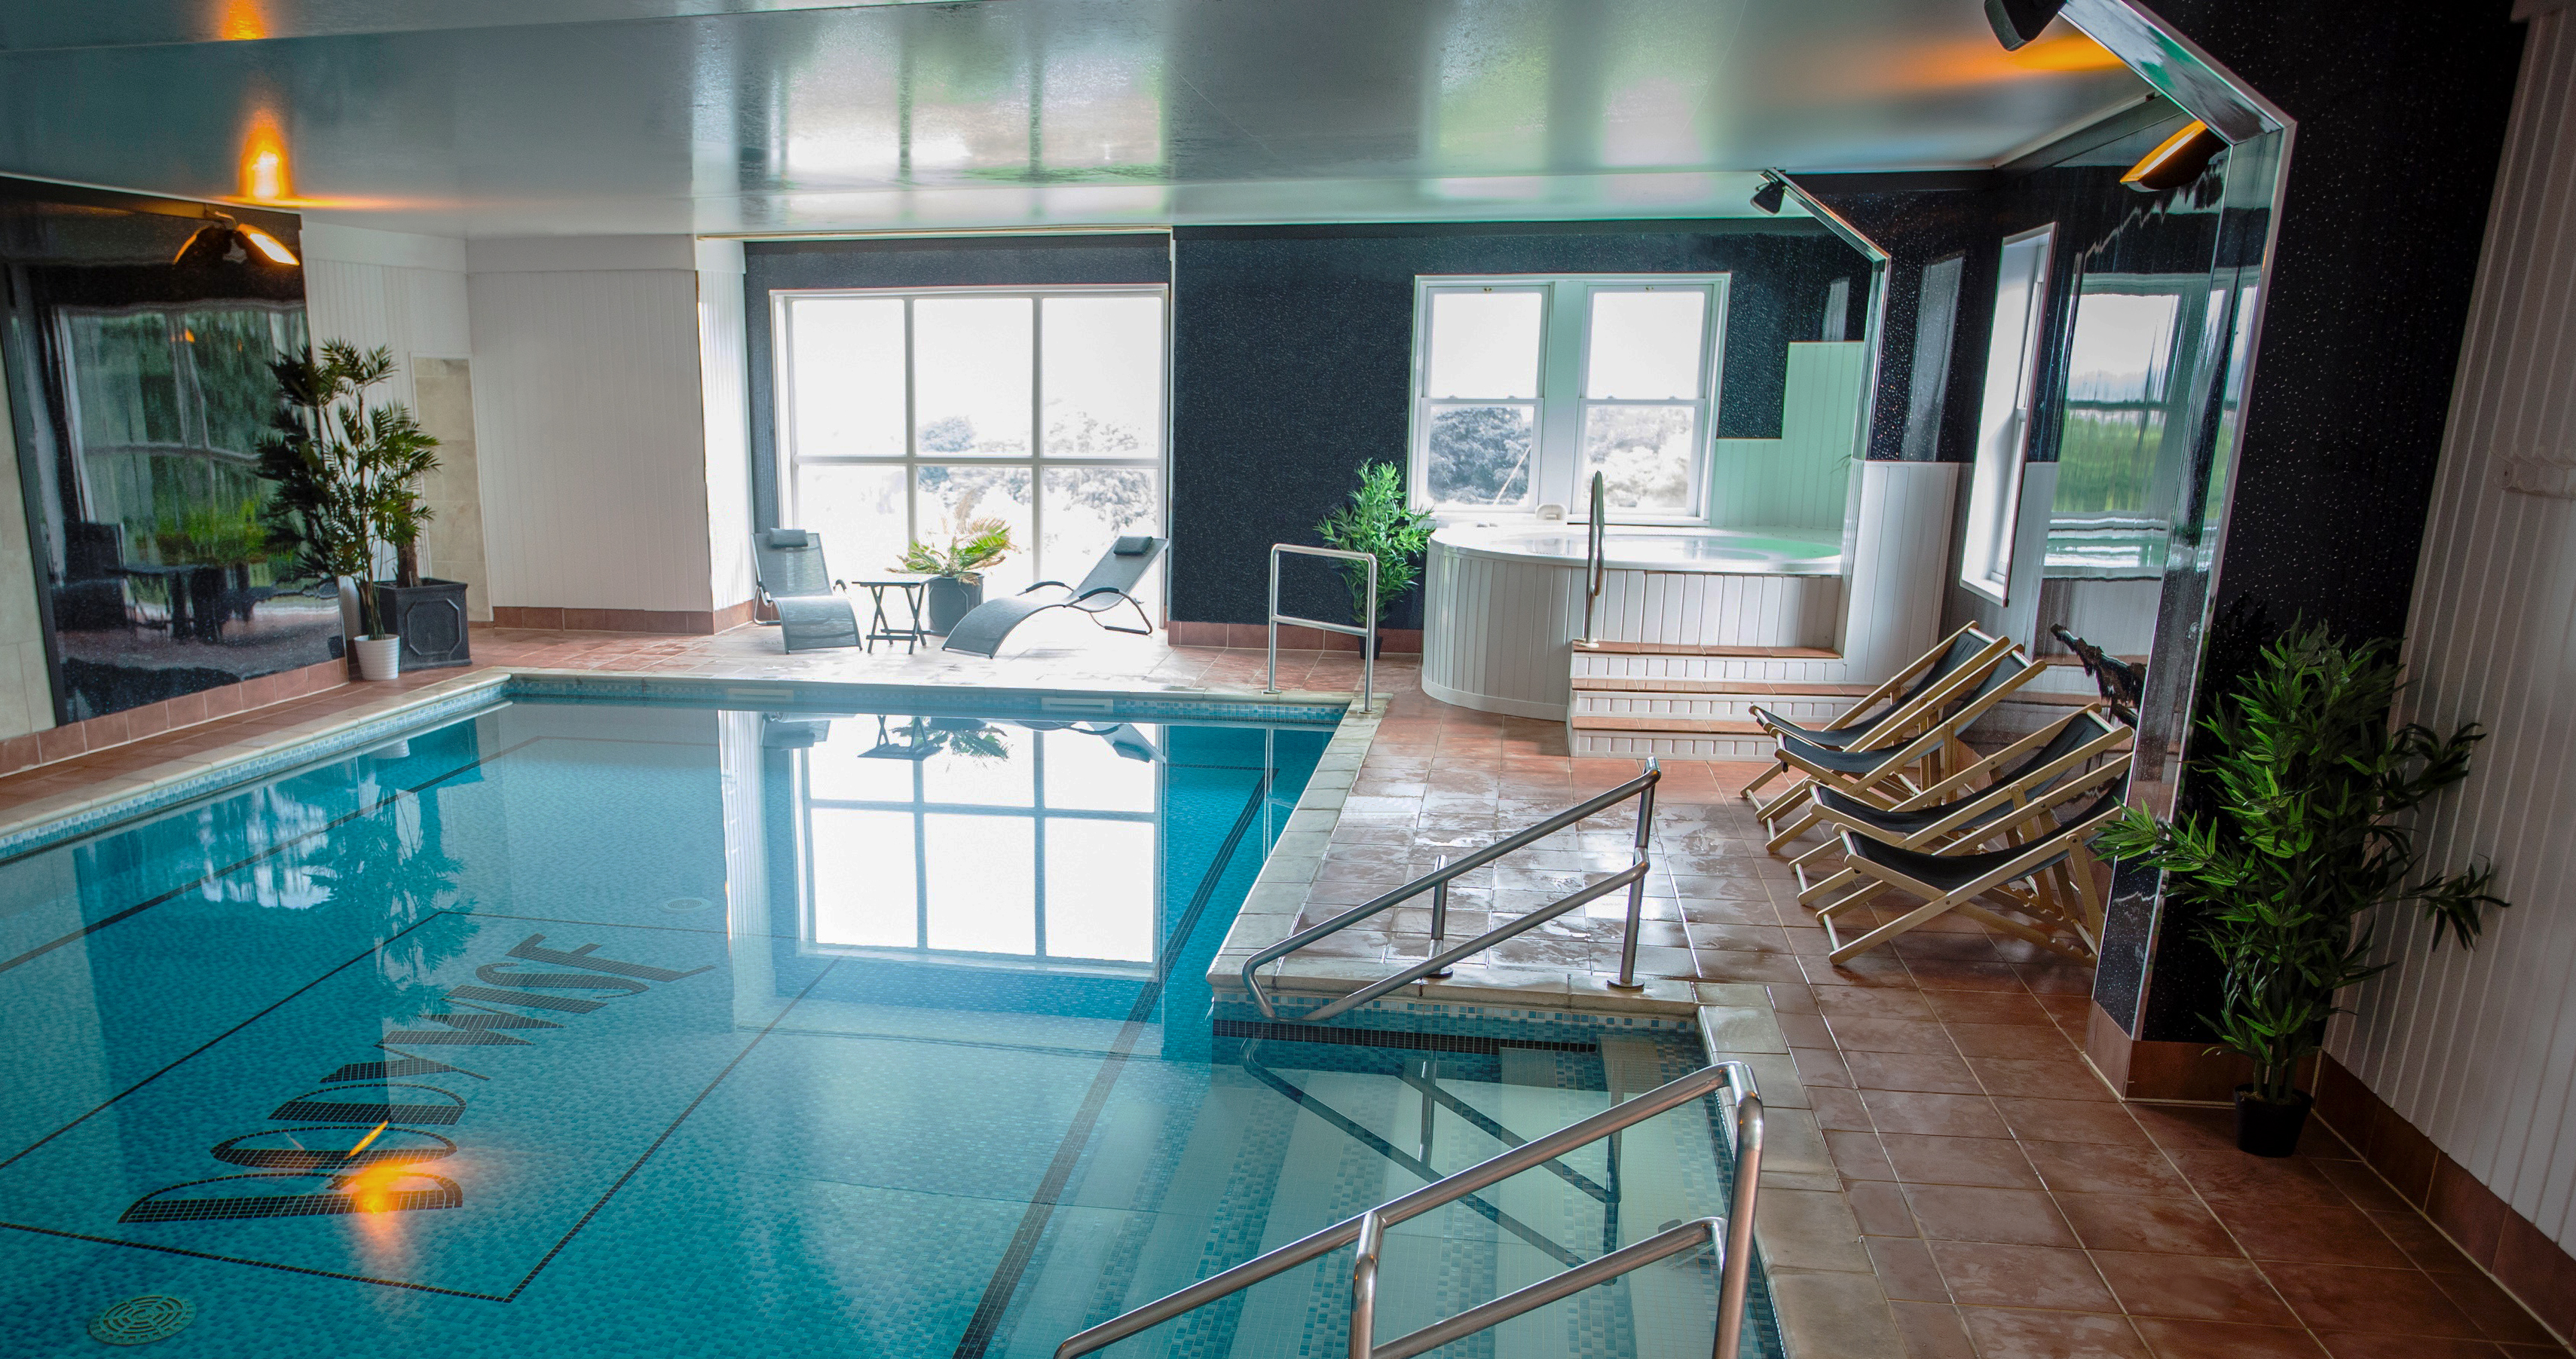 Get Muddy Spa Morning For Two, The Cleve Hotel And Spa